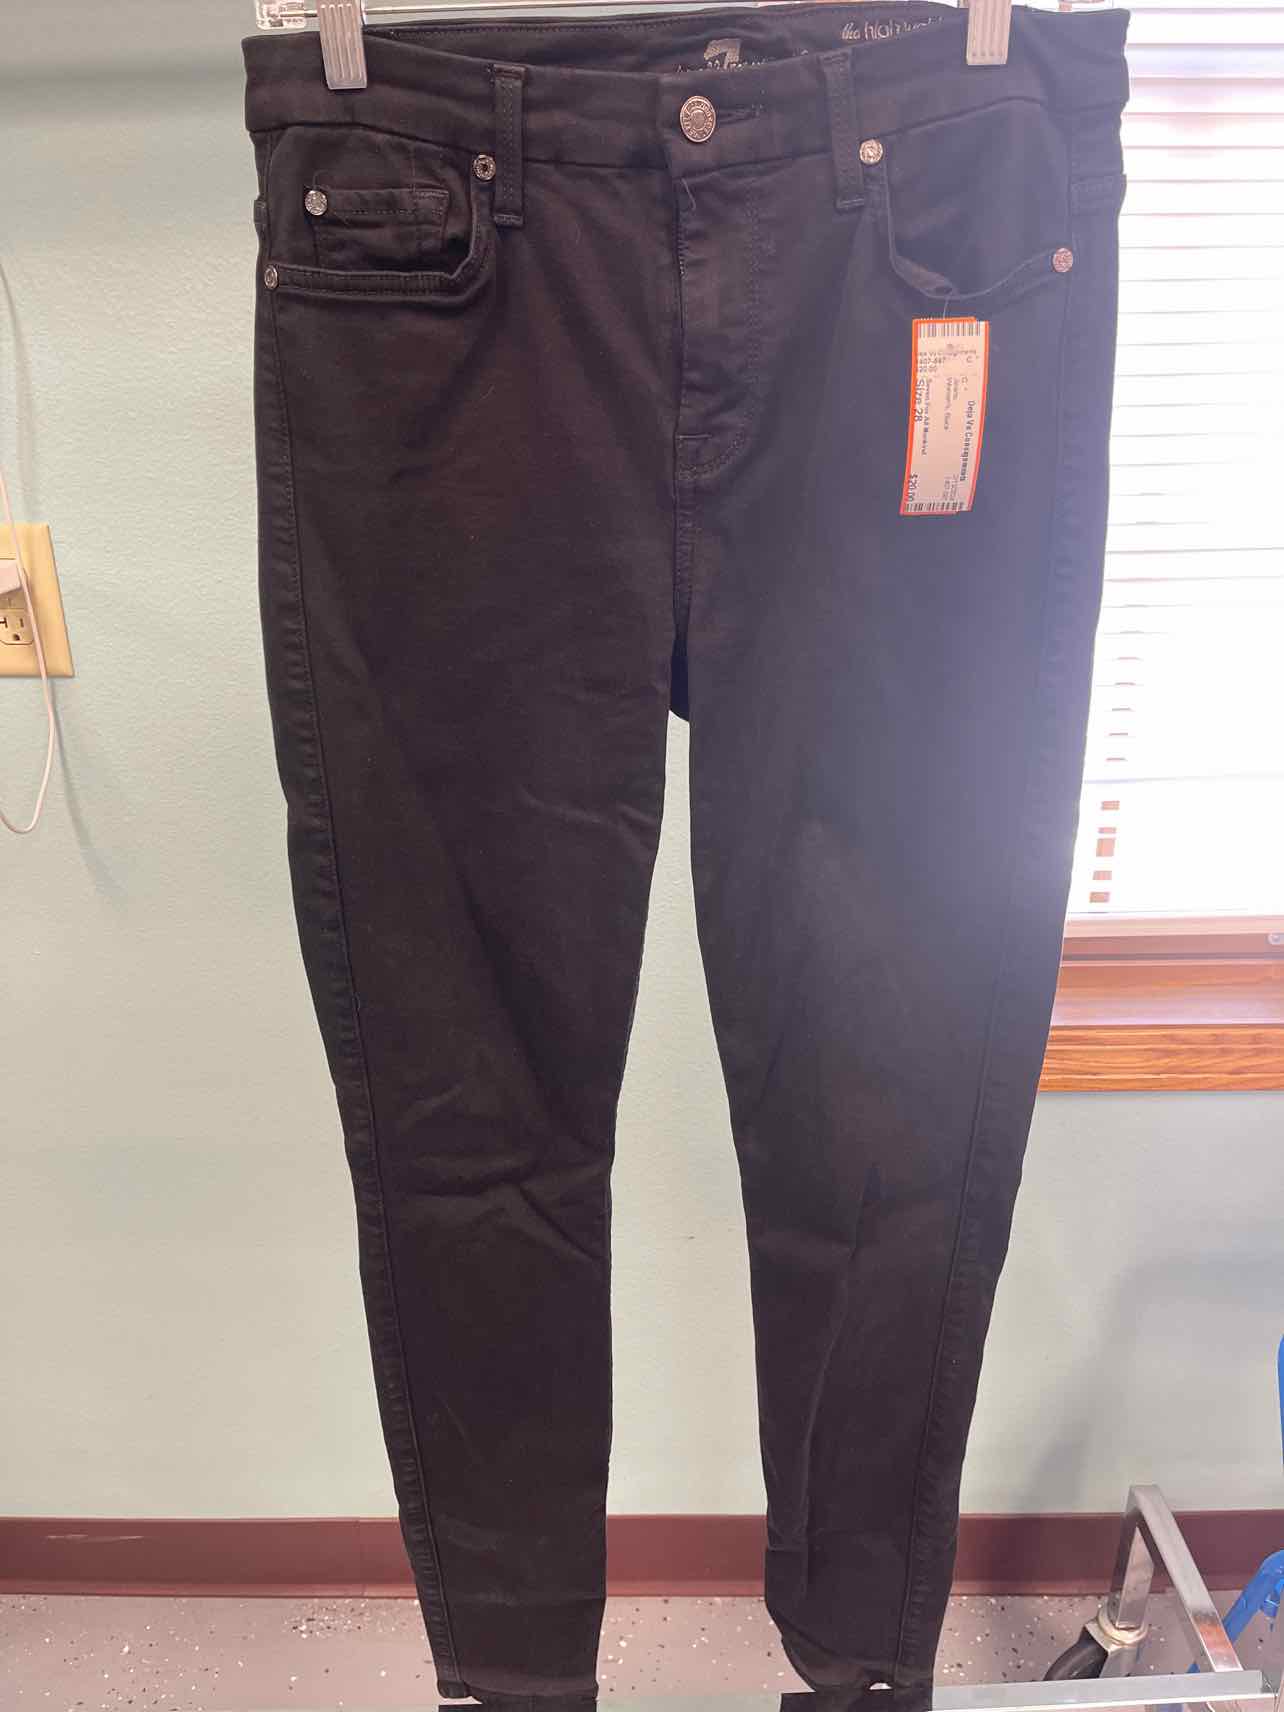 Women's Size 28 Seven For All Mankind Black Jeans